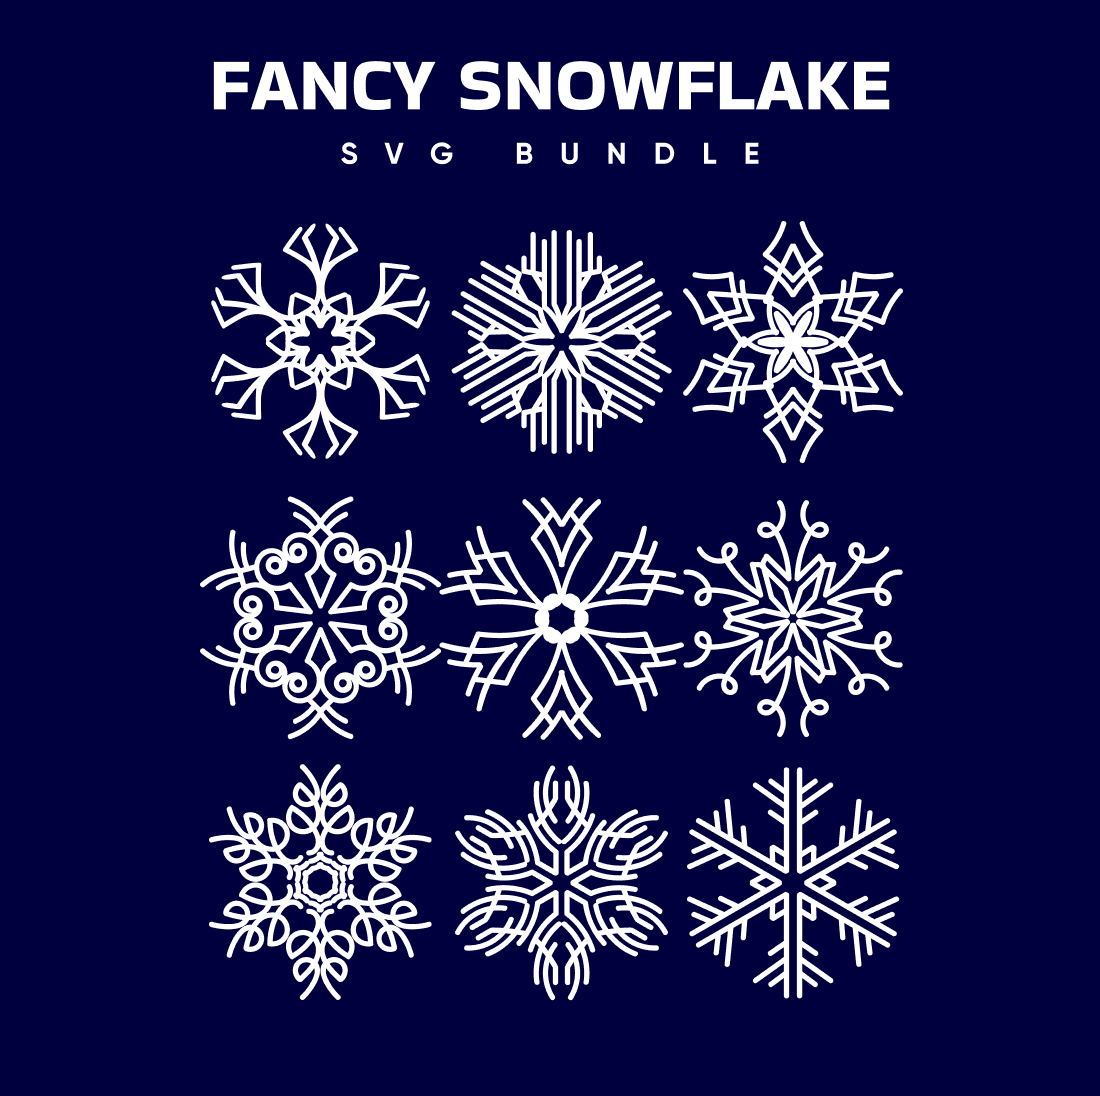 Fancy Snowflake SVG - main image preview.